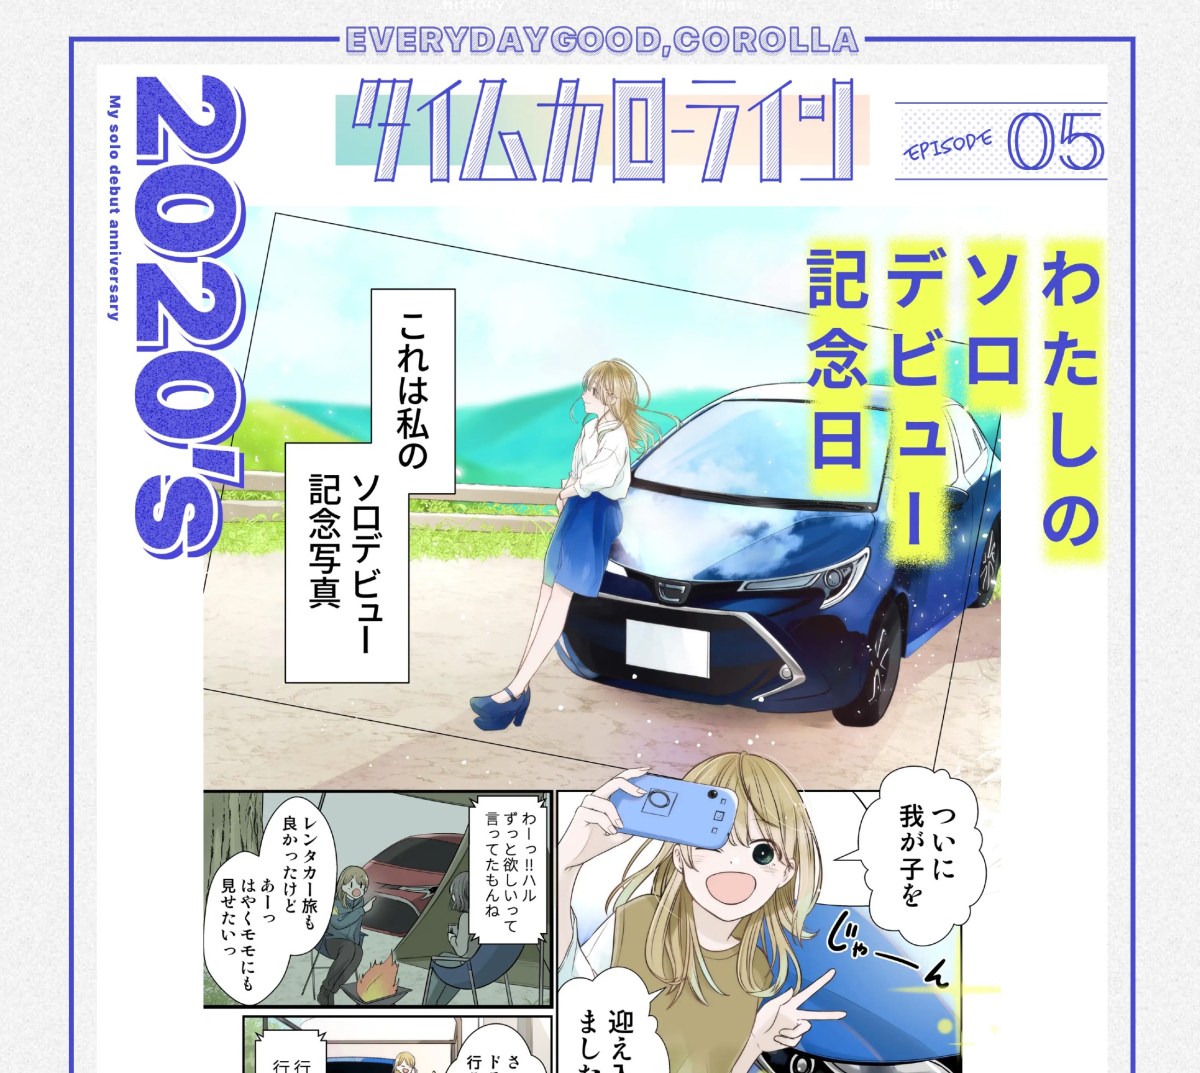 Toyota Manga Series depicting the 2020s version of the Corolla. Part of Toyota's tribute after 50 million units were produced.